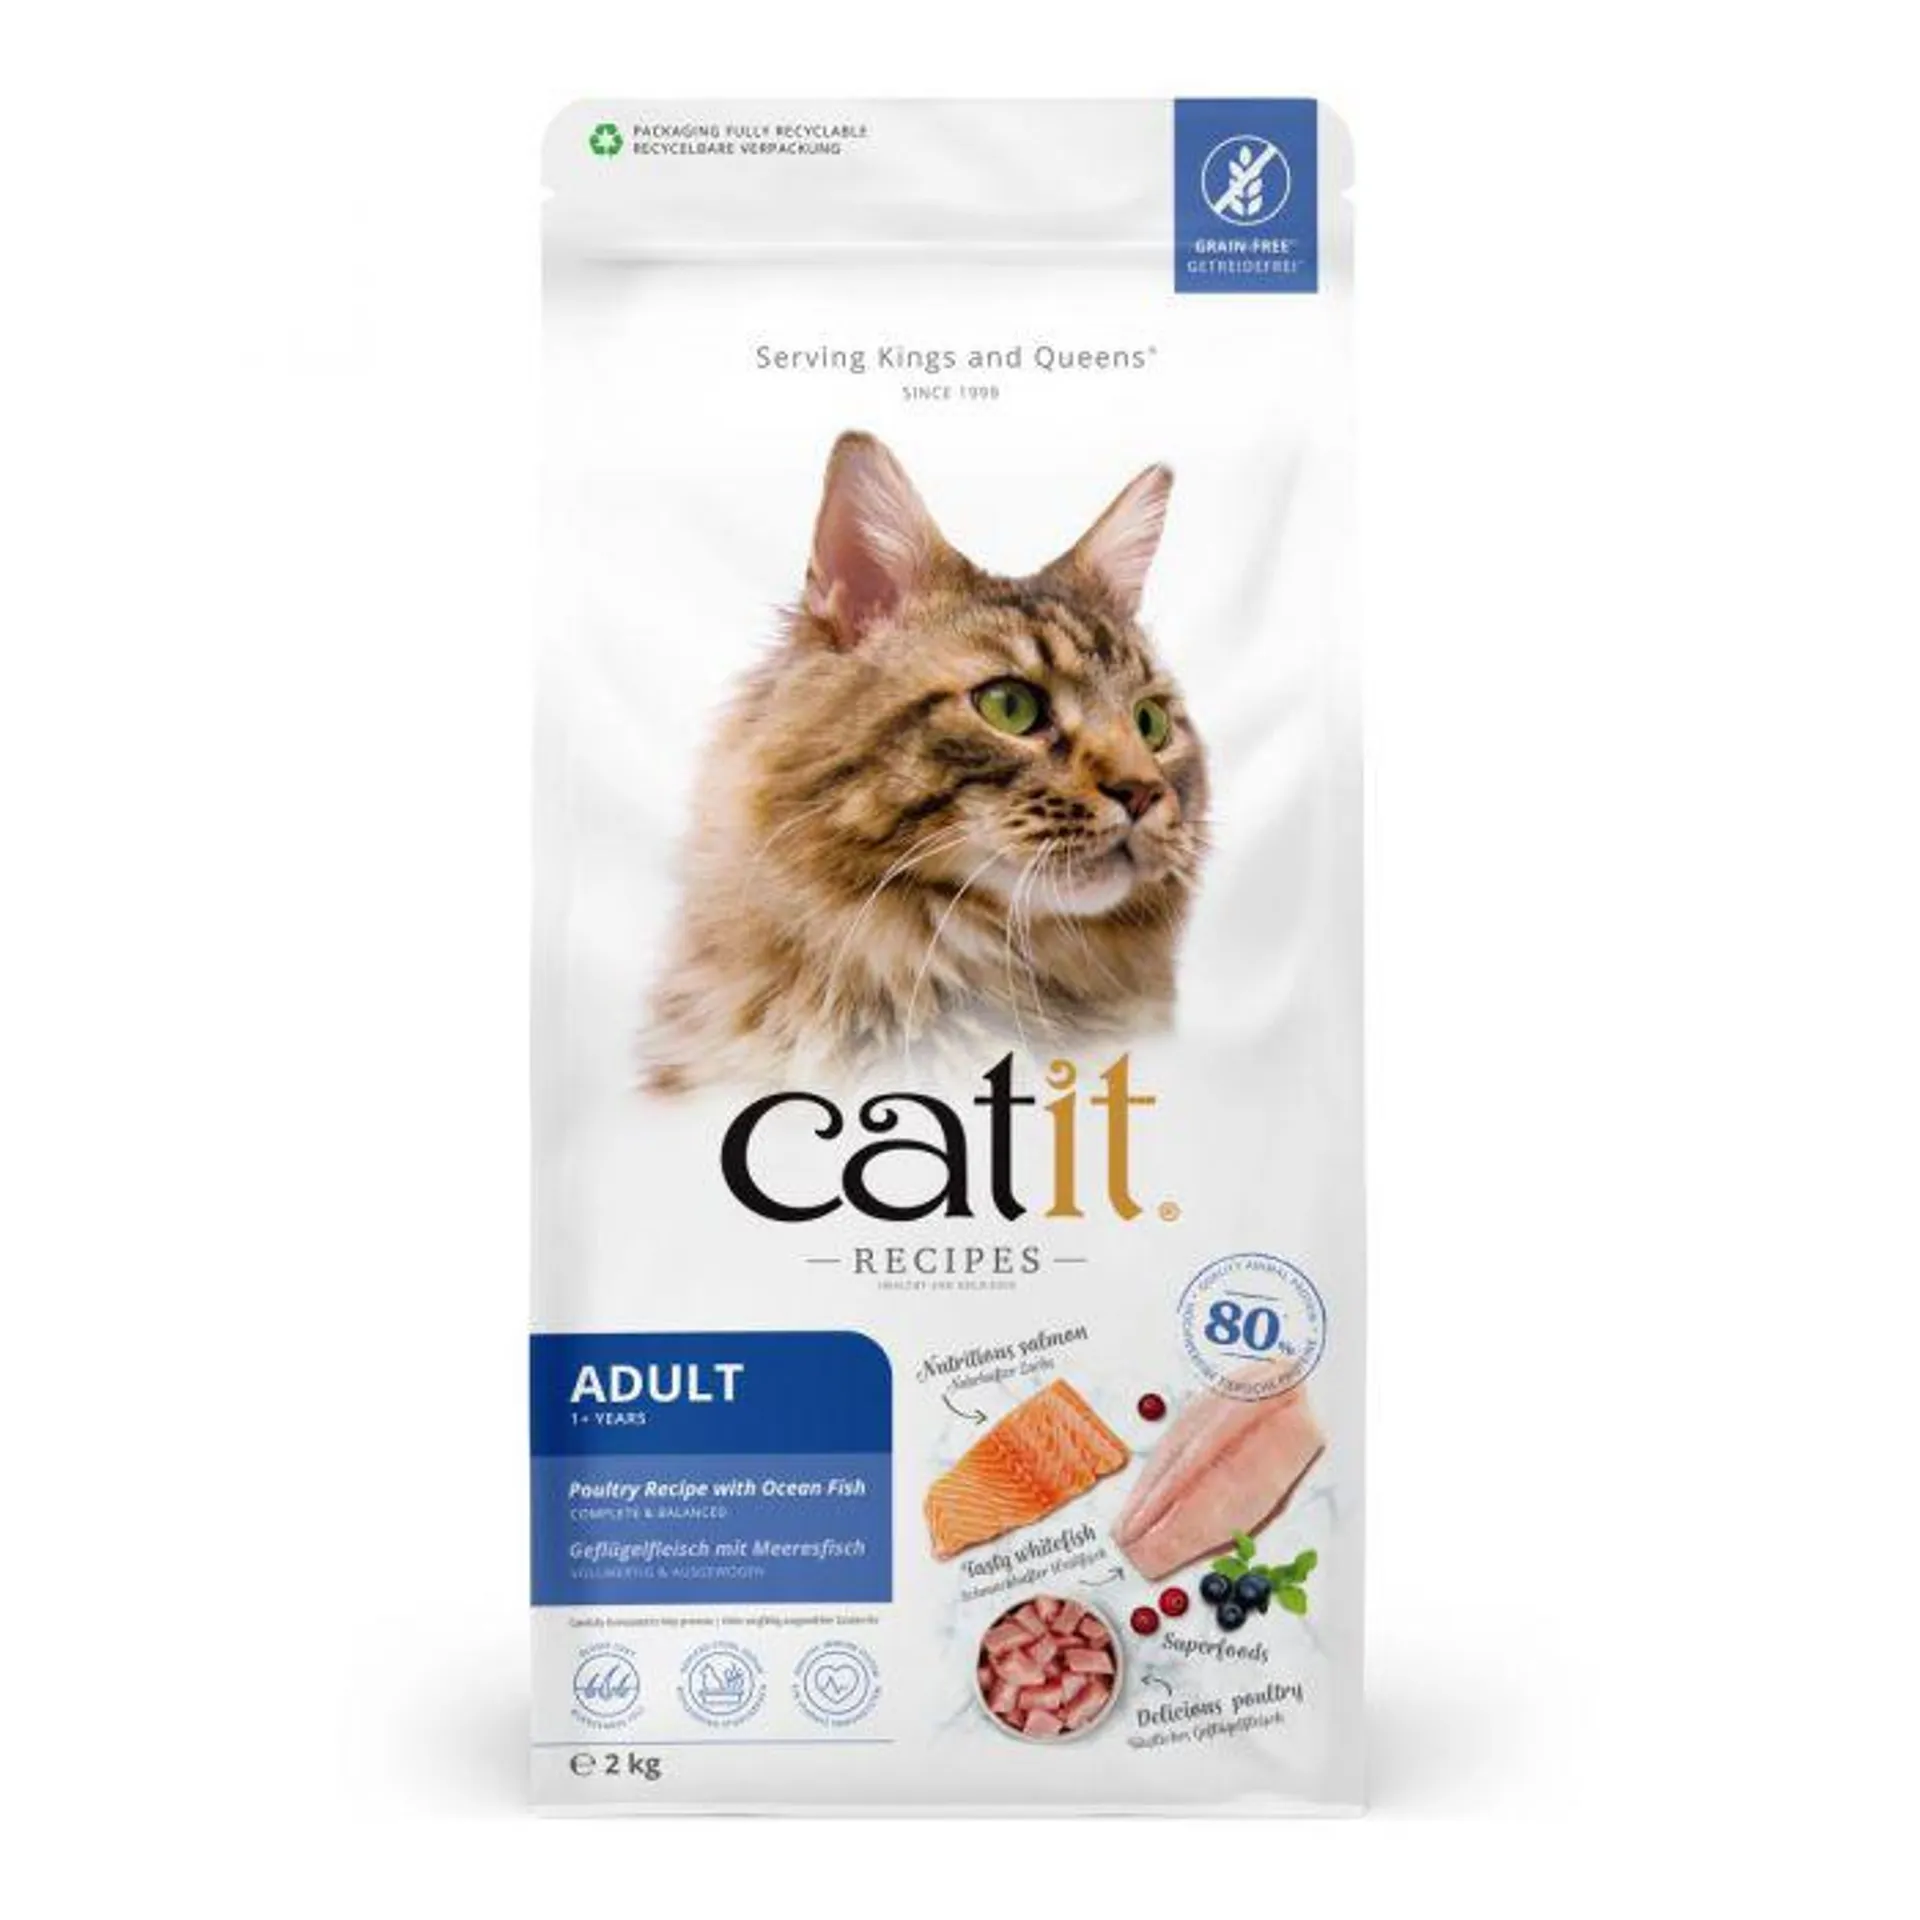 Catit Recipes Adult Poultry Recipe with Ocean Fish, 2kg